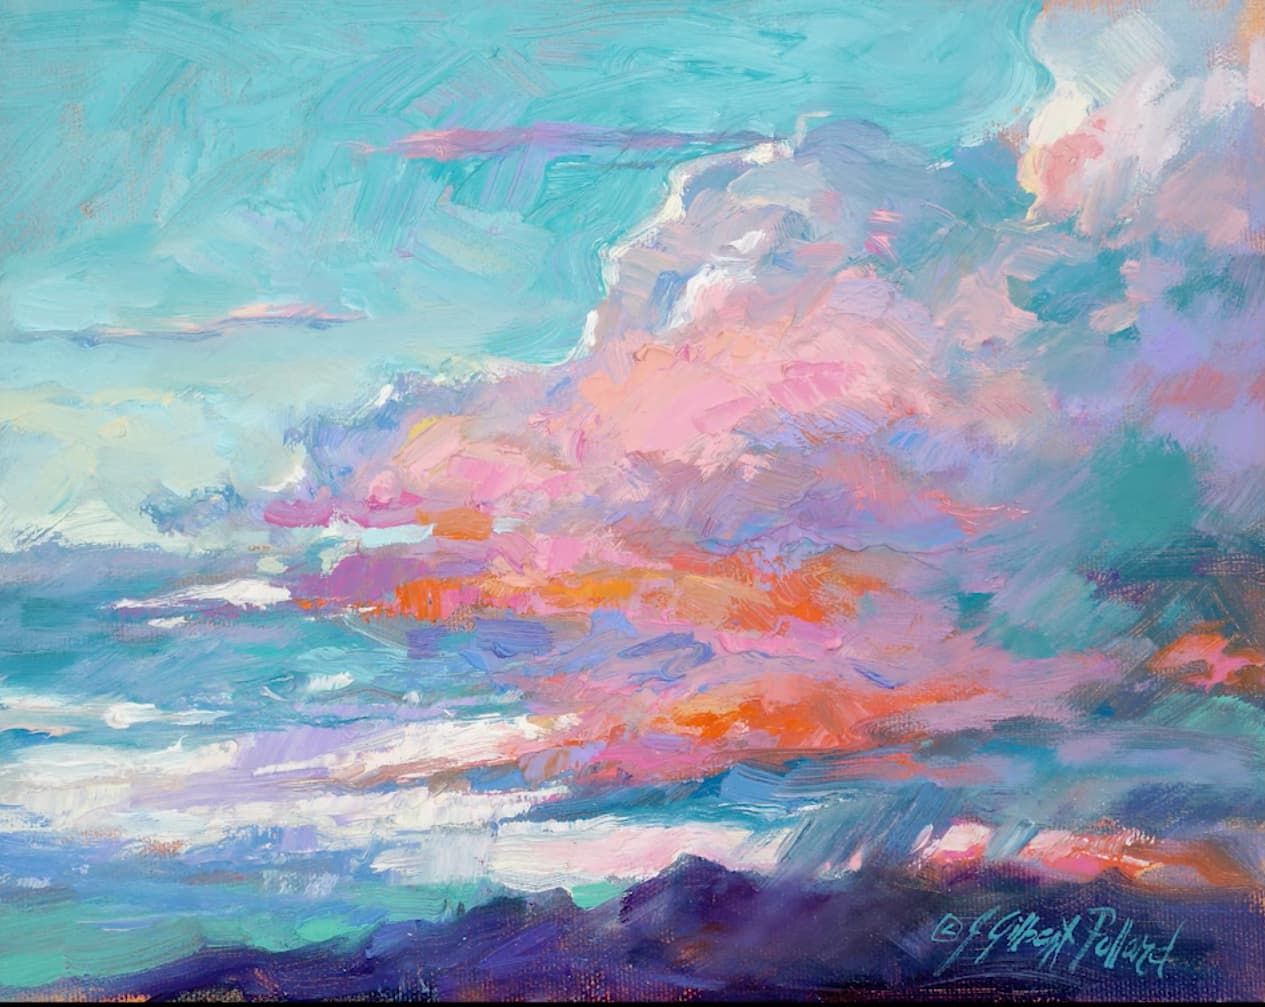 Paint Stunning Skies in Watercolor, Oil, and Pastel: 3 Essential Videos